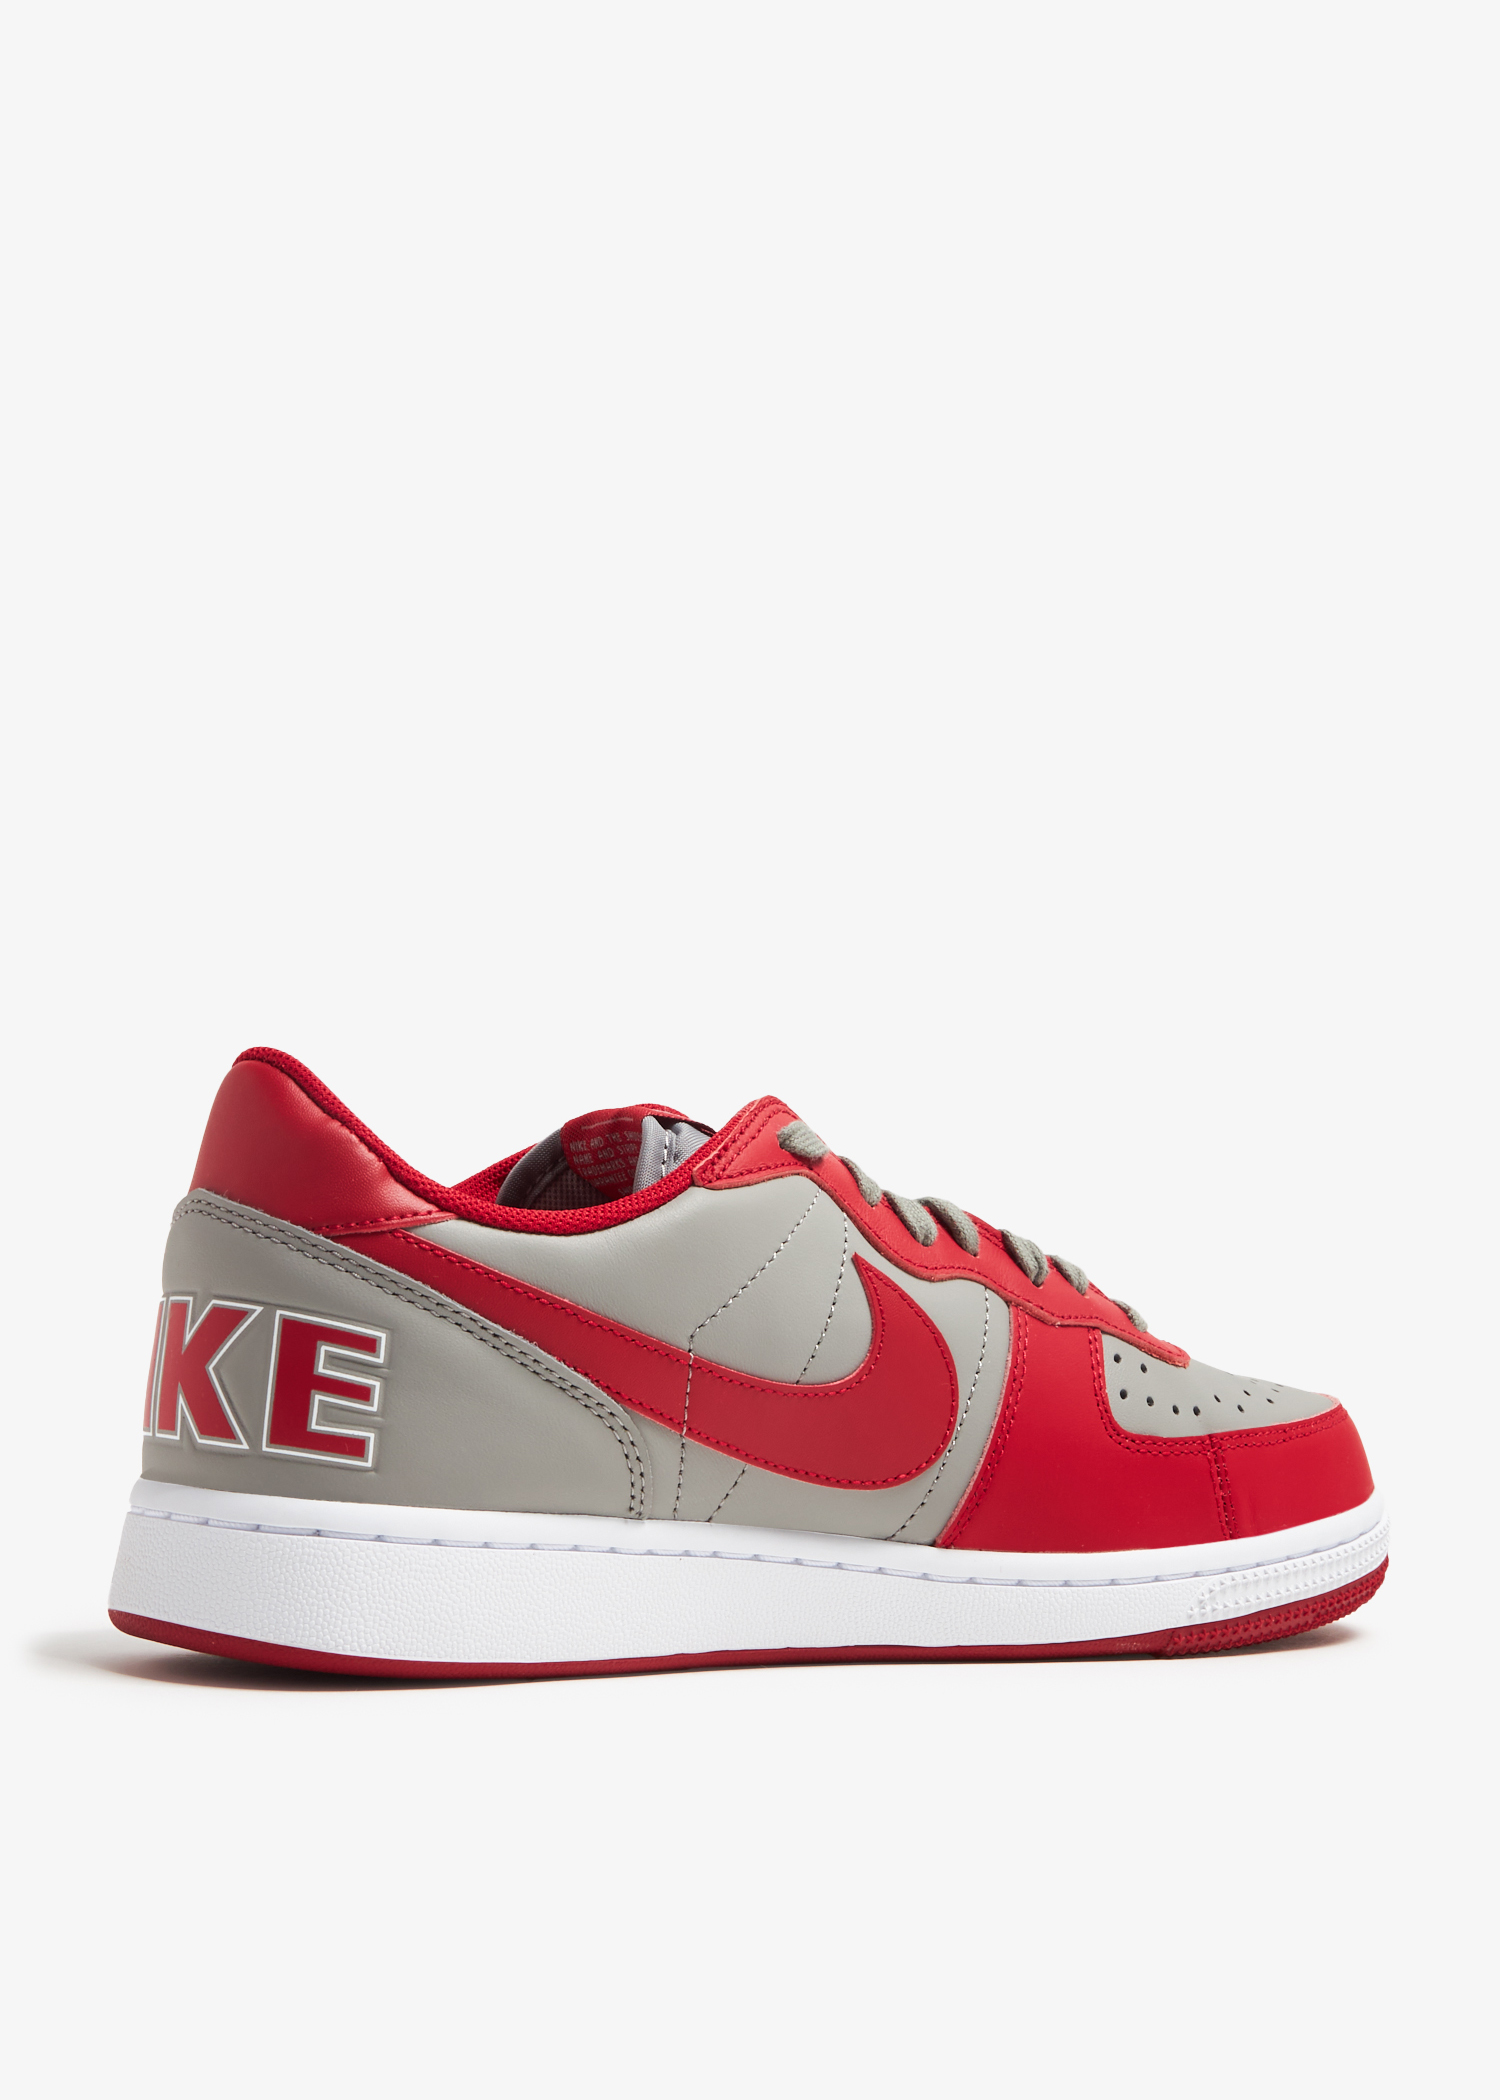 Nike Terminator Low 'UNLV' sneakers for Men - Red in UAE | Level Shoes